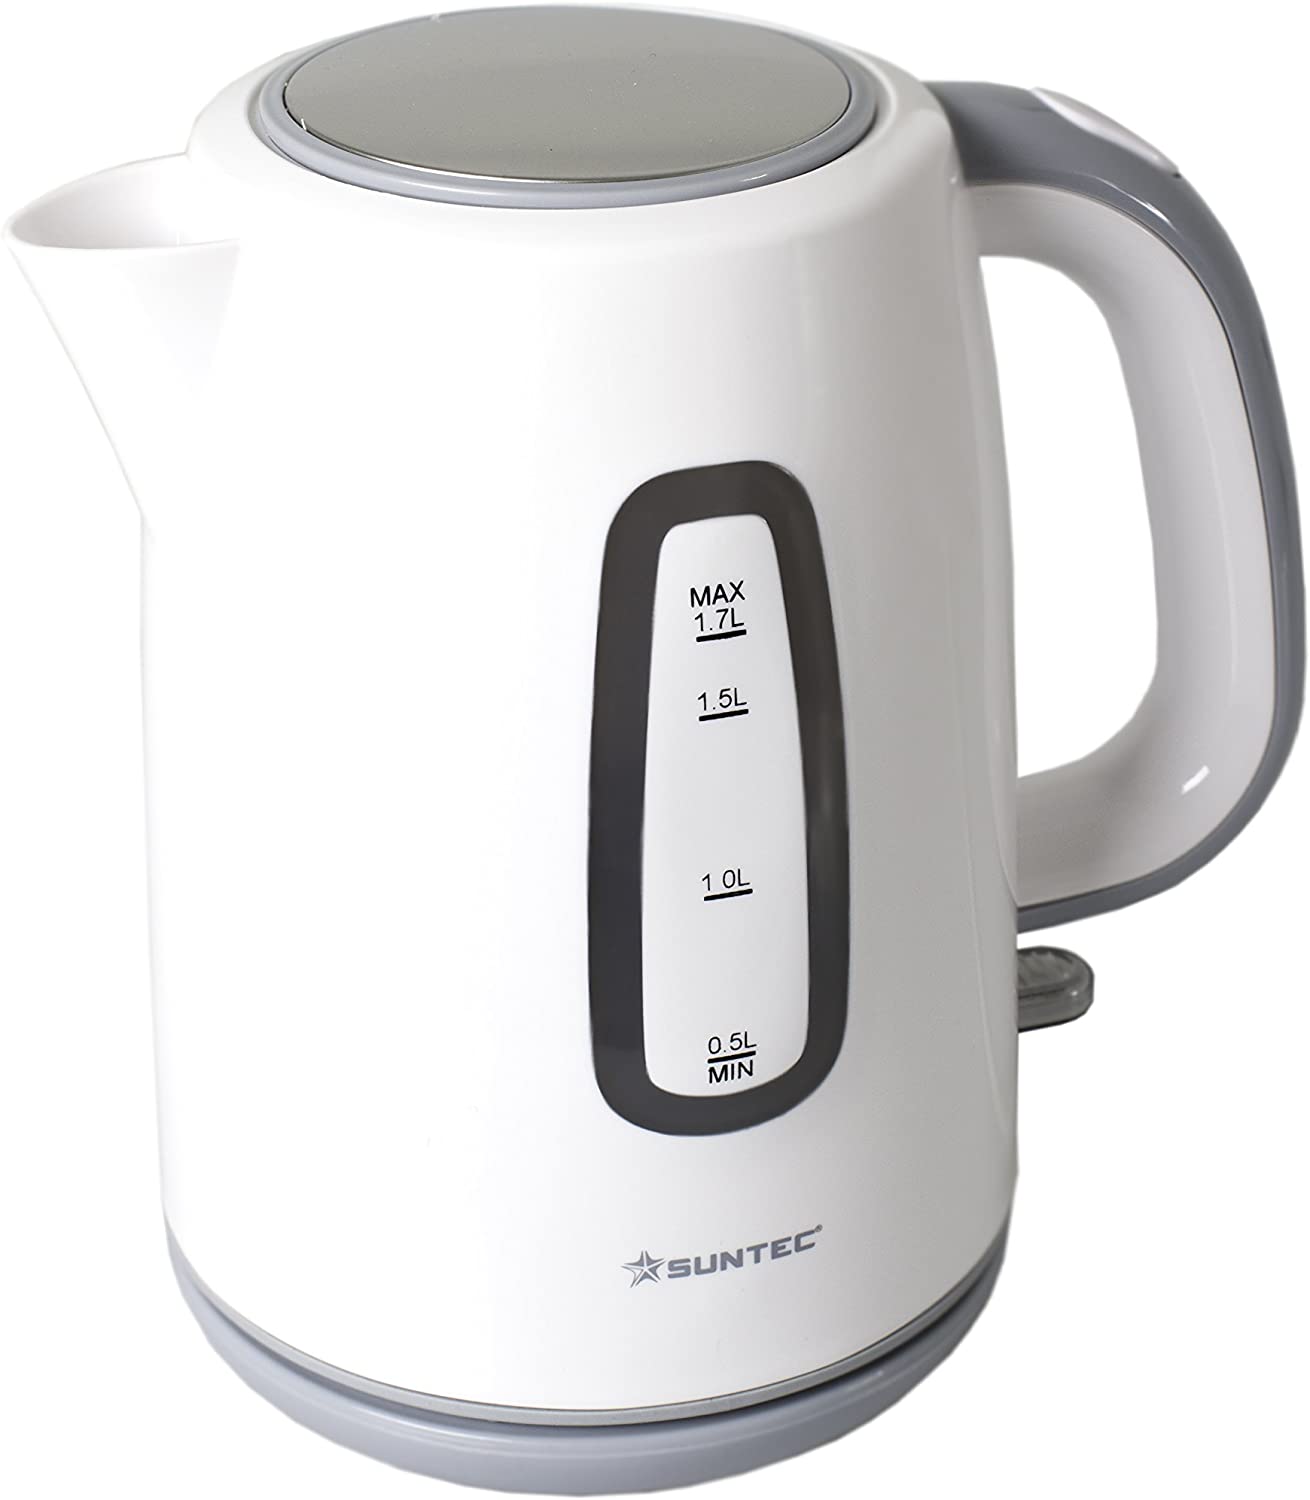 Home Essentials Wak 9257 [Electric Kettle 1.7L Fasungs) Max Capacity, 360 ° base, Water Level Indicator, 2000 Watt